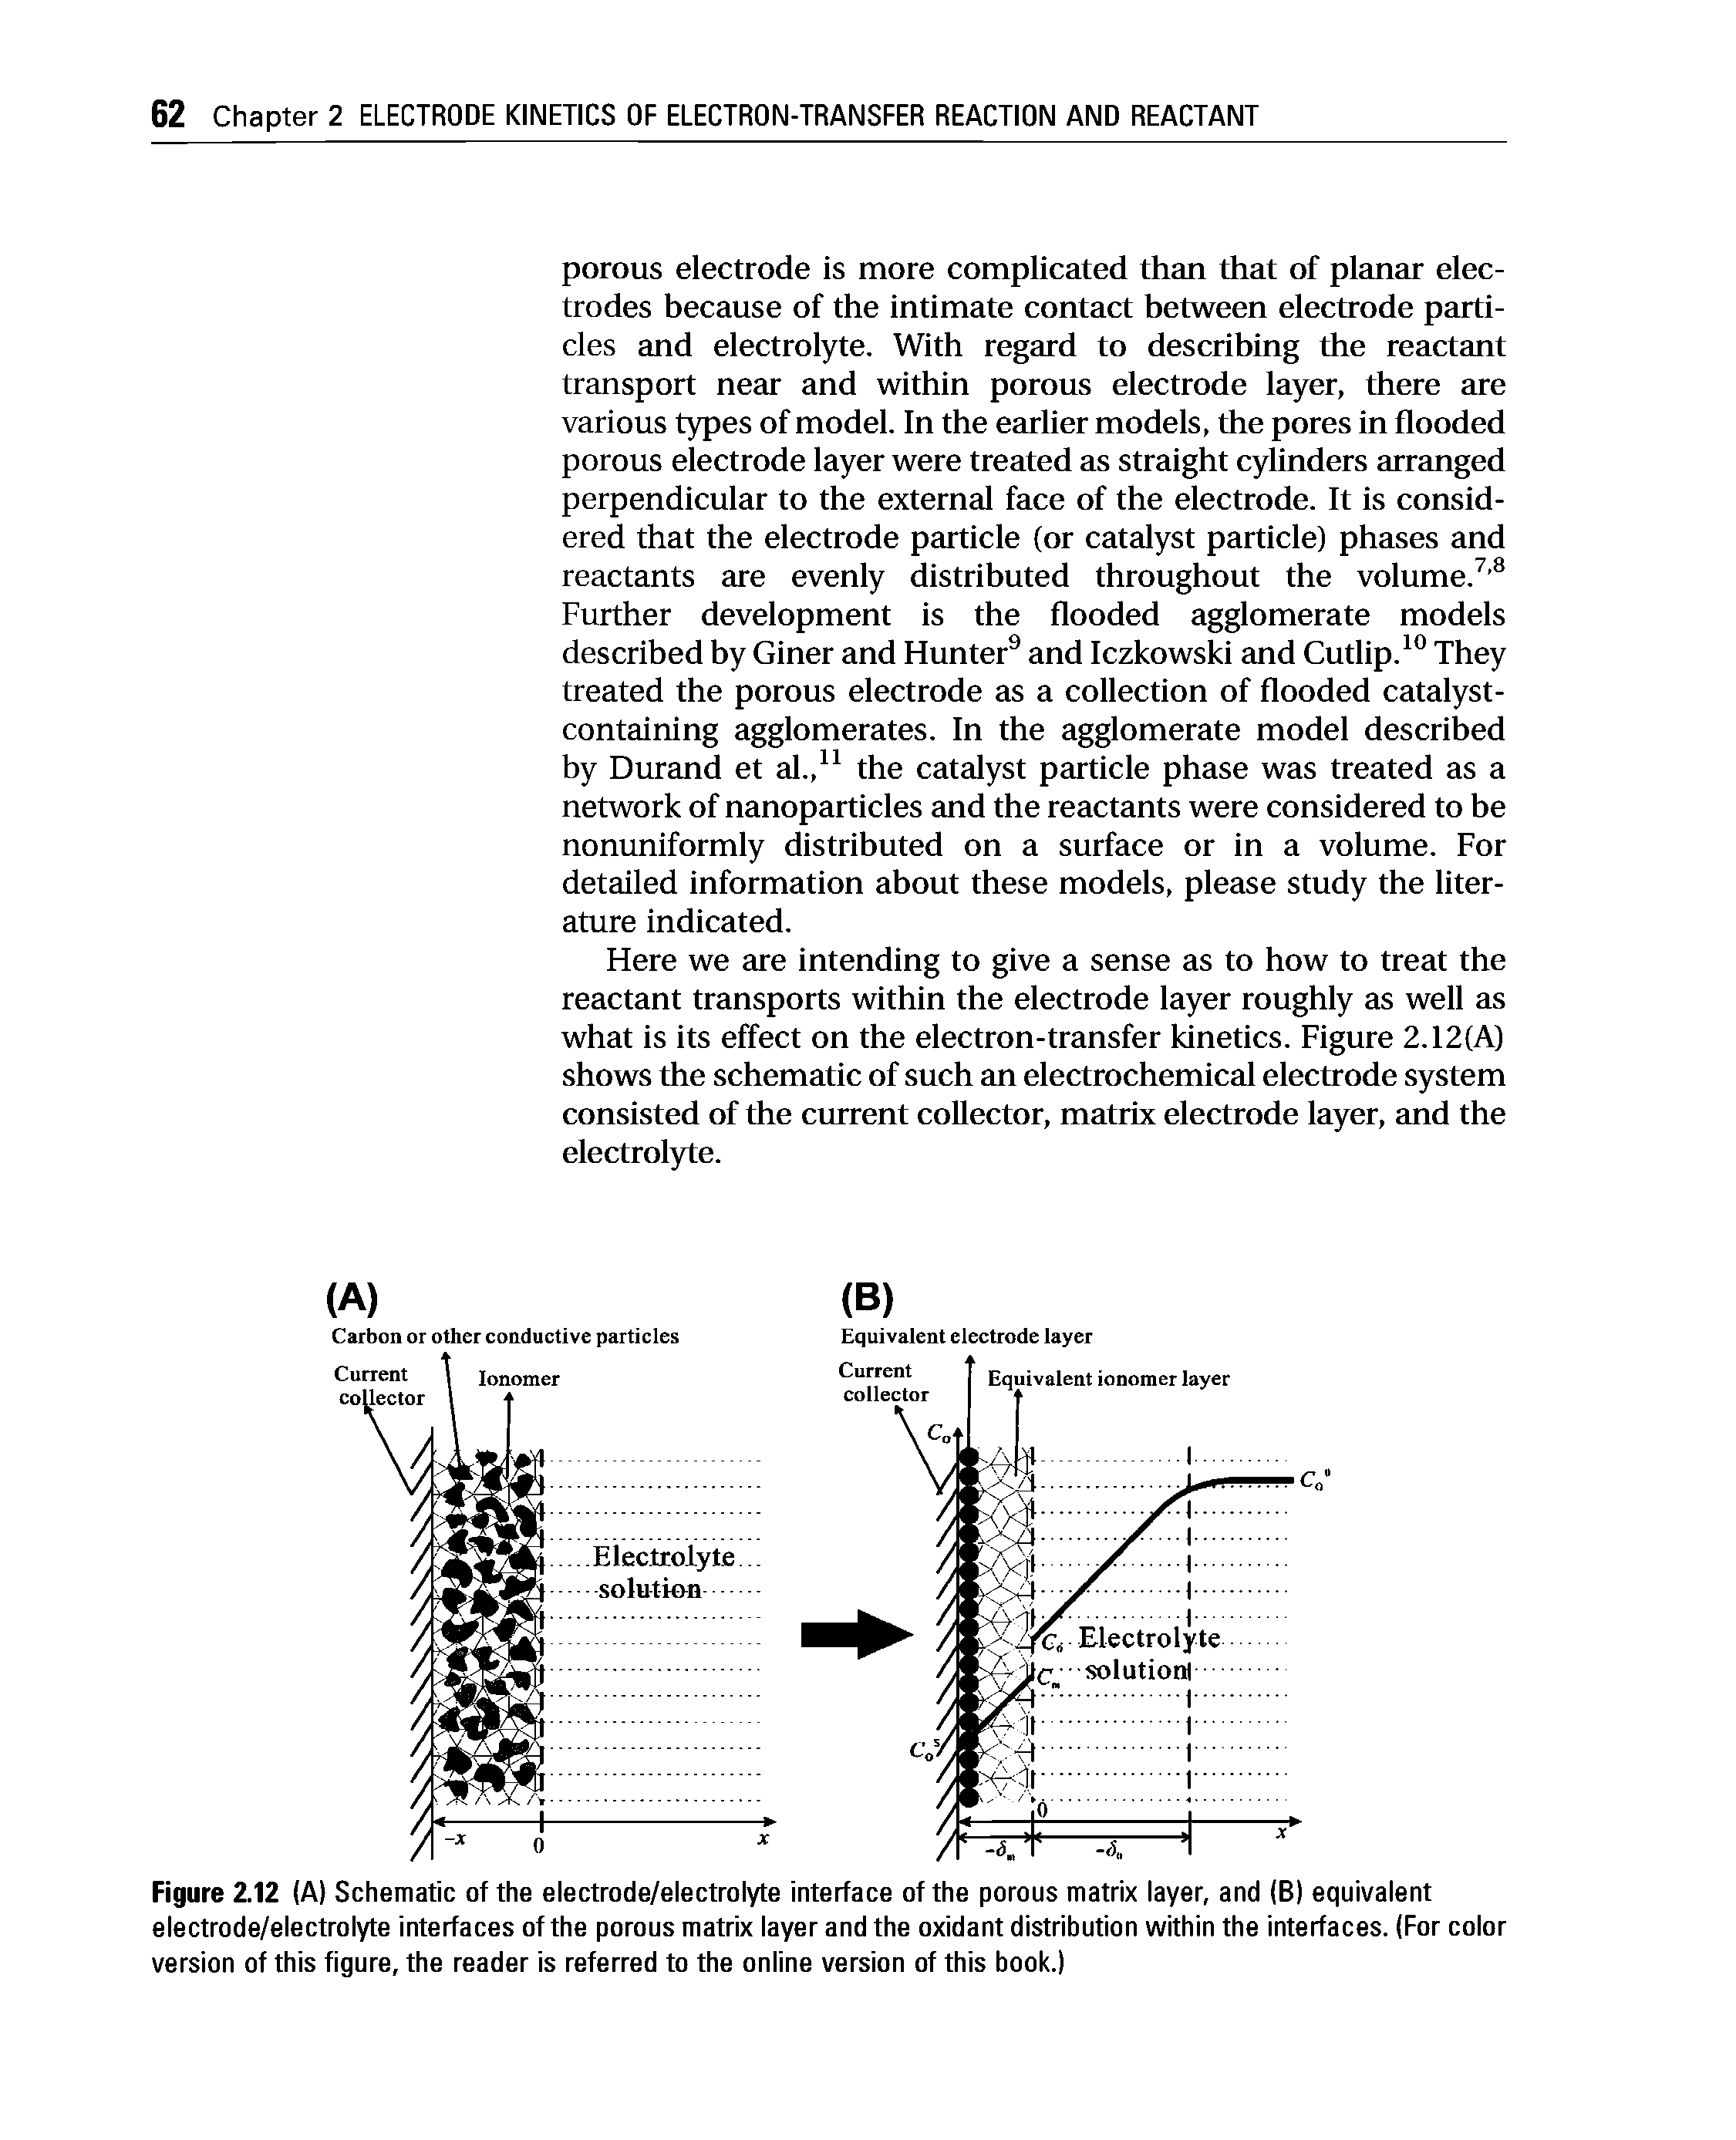 Figure 2.12 (A) Schematic of the electrode/electrolyte interface of the porous matrix layer, and (B) equivalent electrode/electrolyte interfaces of the porous matrix layer and the oxidant distribution within the interfaces. (For color version of this figure, the reader is referred to the online version of this book.)...